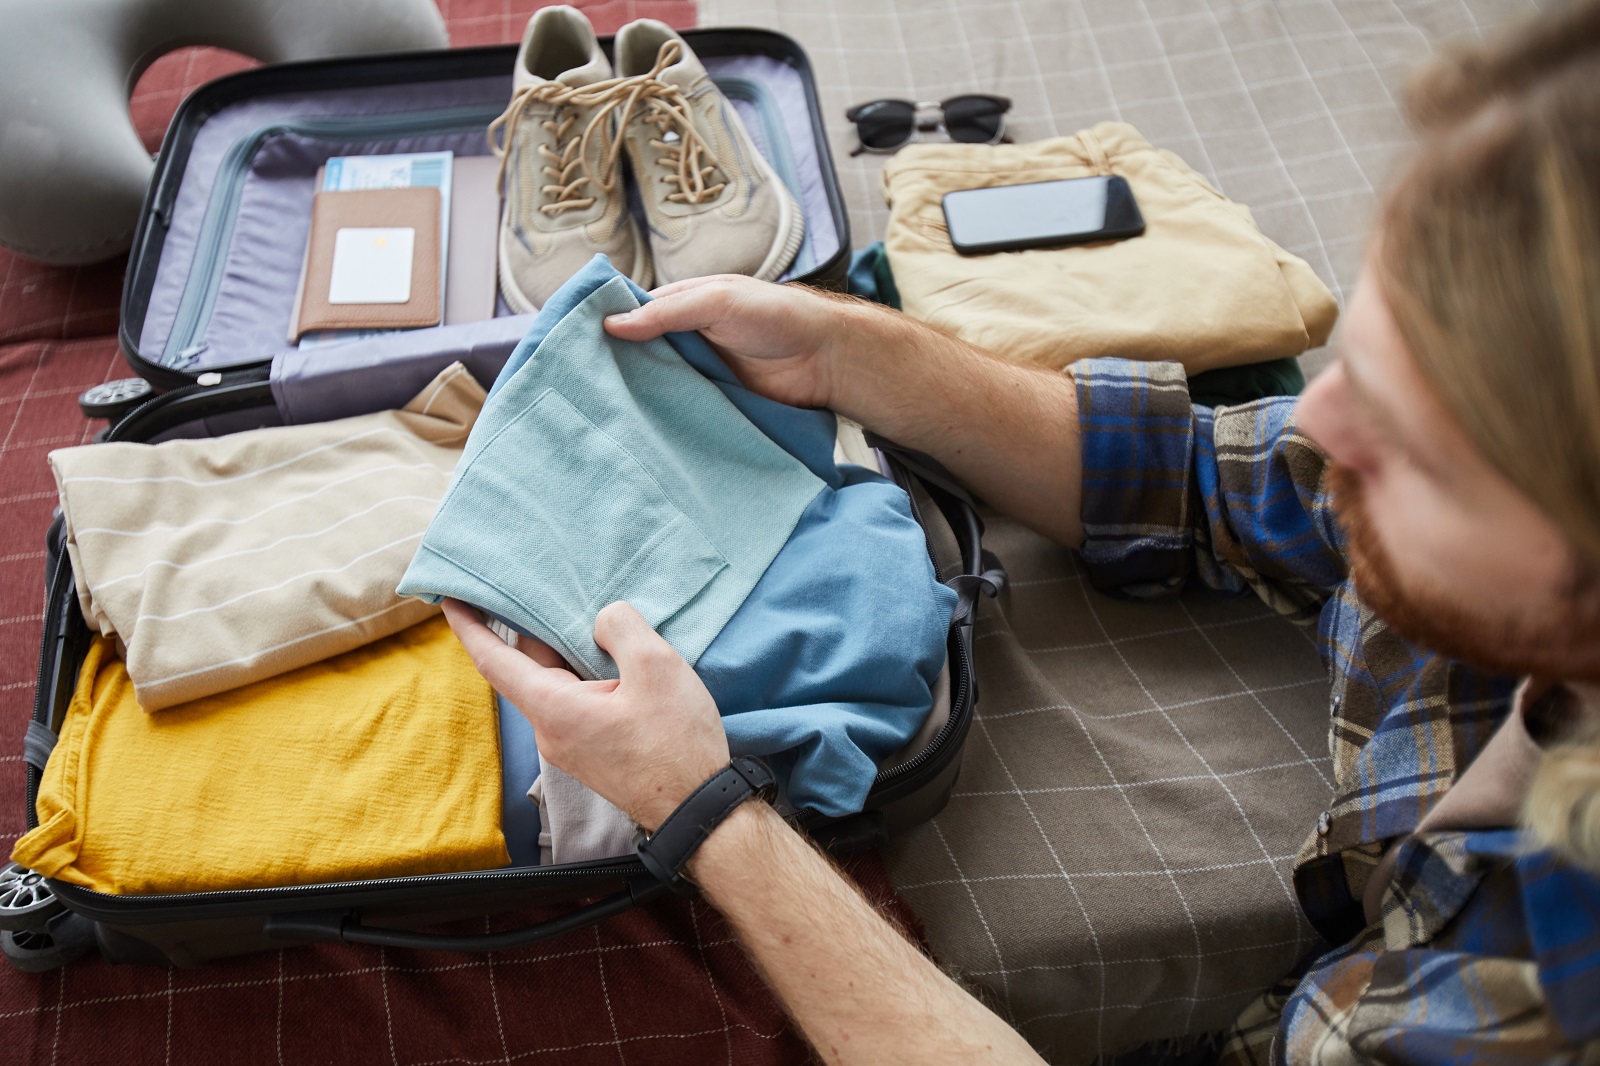 <p class="wp-caption-text">Image Credit: Shutterstock / AnnaStills</p>  <p><span>Incorporating these apps into your travel toolkit can significantly streamline managing your finances abroad, giving you more time to enjoy your travels. Remember, while these apps offer convenience, always maintain awareness of digital security when accessing your financial information on the go.</span></p> <p><span>The post <a href="https://mechanicinsider.com/must-have-banking-apps">Six Must-Have Banking Apps for Effortless Money Management During International Travel</a>  first appeared on <a class="in-cell-link" href="https://mechanicinsider.com/" rel="noopener">Mechanic Insider</a>.<br> </span></p> <p><span>Featured Image Credit: Shutterstock / Zamrznuti tonovi.<br> </span></p> <p><span>For transparency, this content was partly developed with AI assistance and carefully curated by an experienced editor to be informative and ensure accuracy.<br> </span></p>